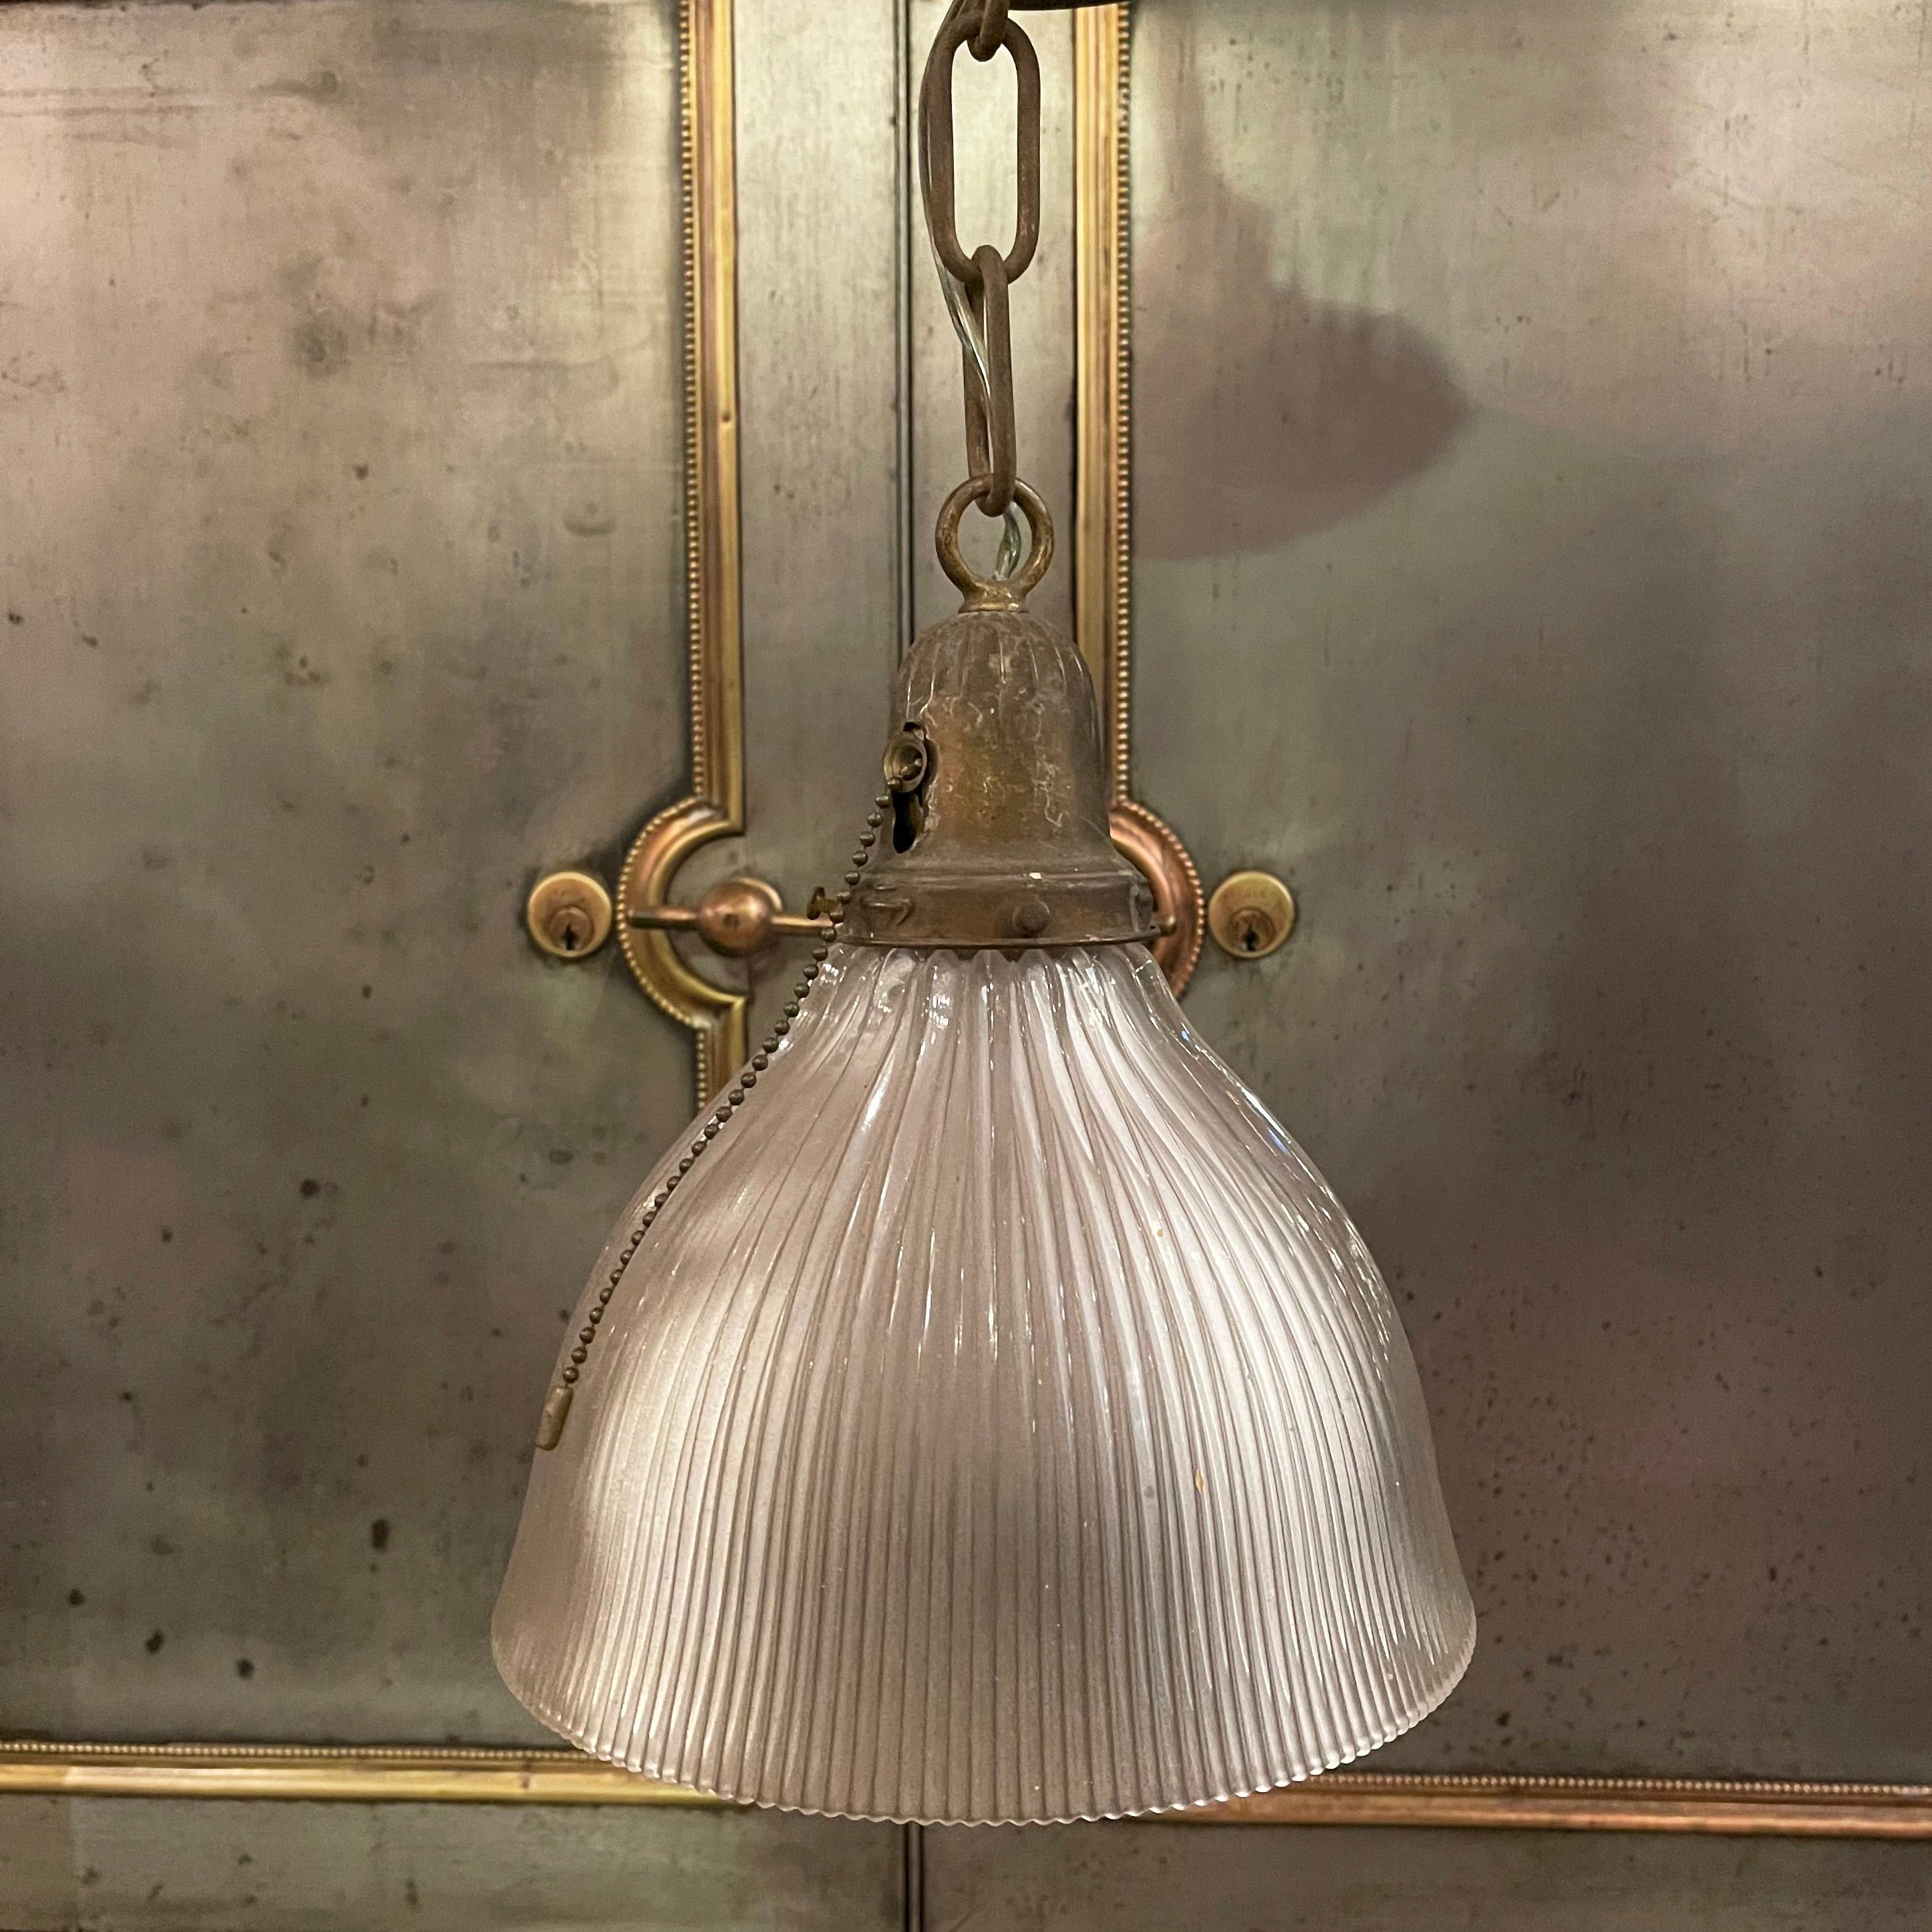 Early 20th century, industrial pendant light features a cut glass, dome shade with patinated brass pull chain fitter, chain link and canopy. The pendant hangs at an overall height of 36 inches and the canopy measures 5 inches diameter.